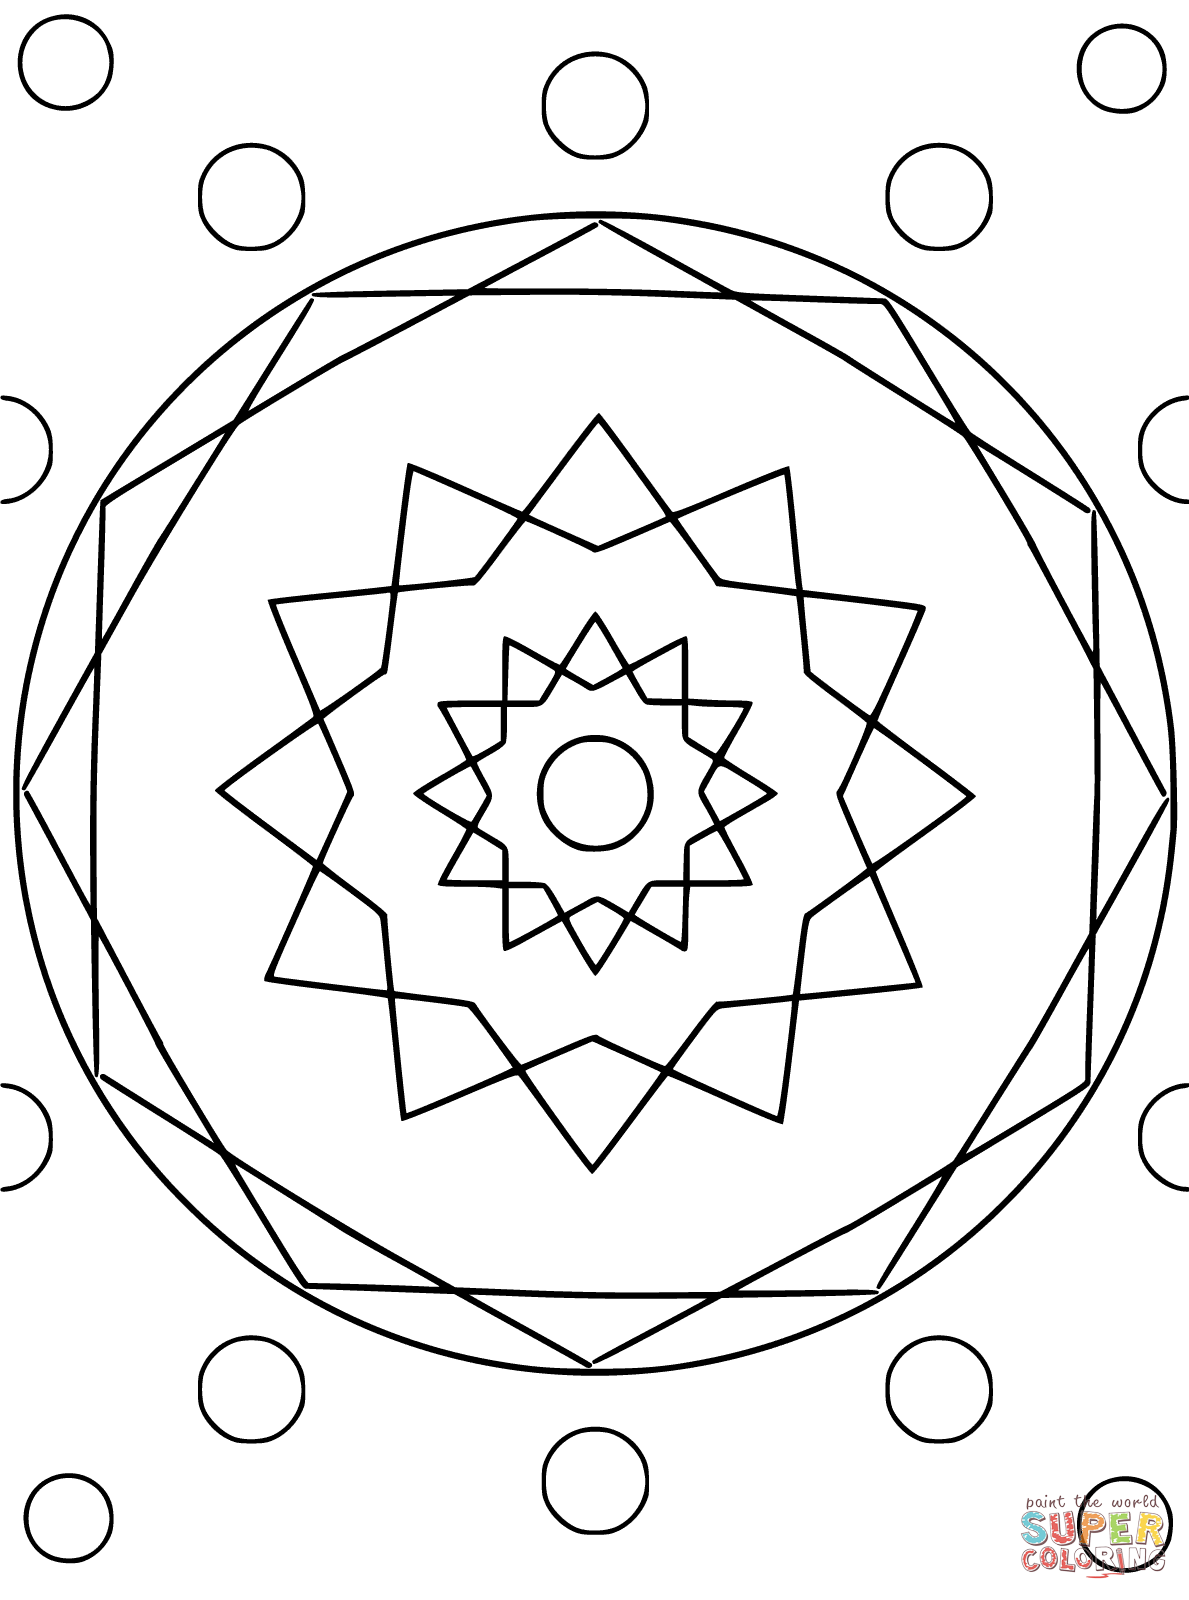 Hexagon 9 Cool Coloring Page